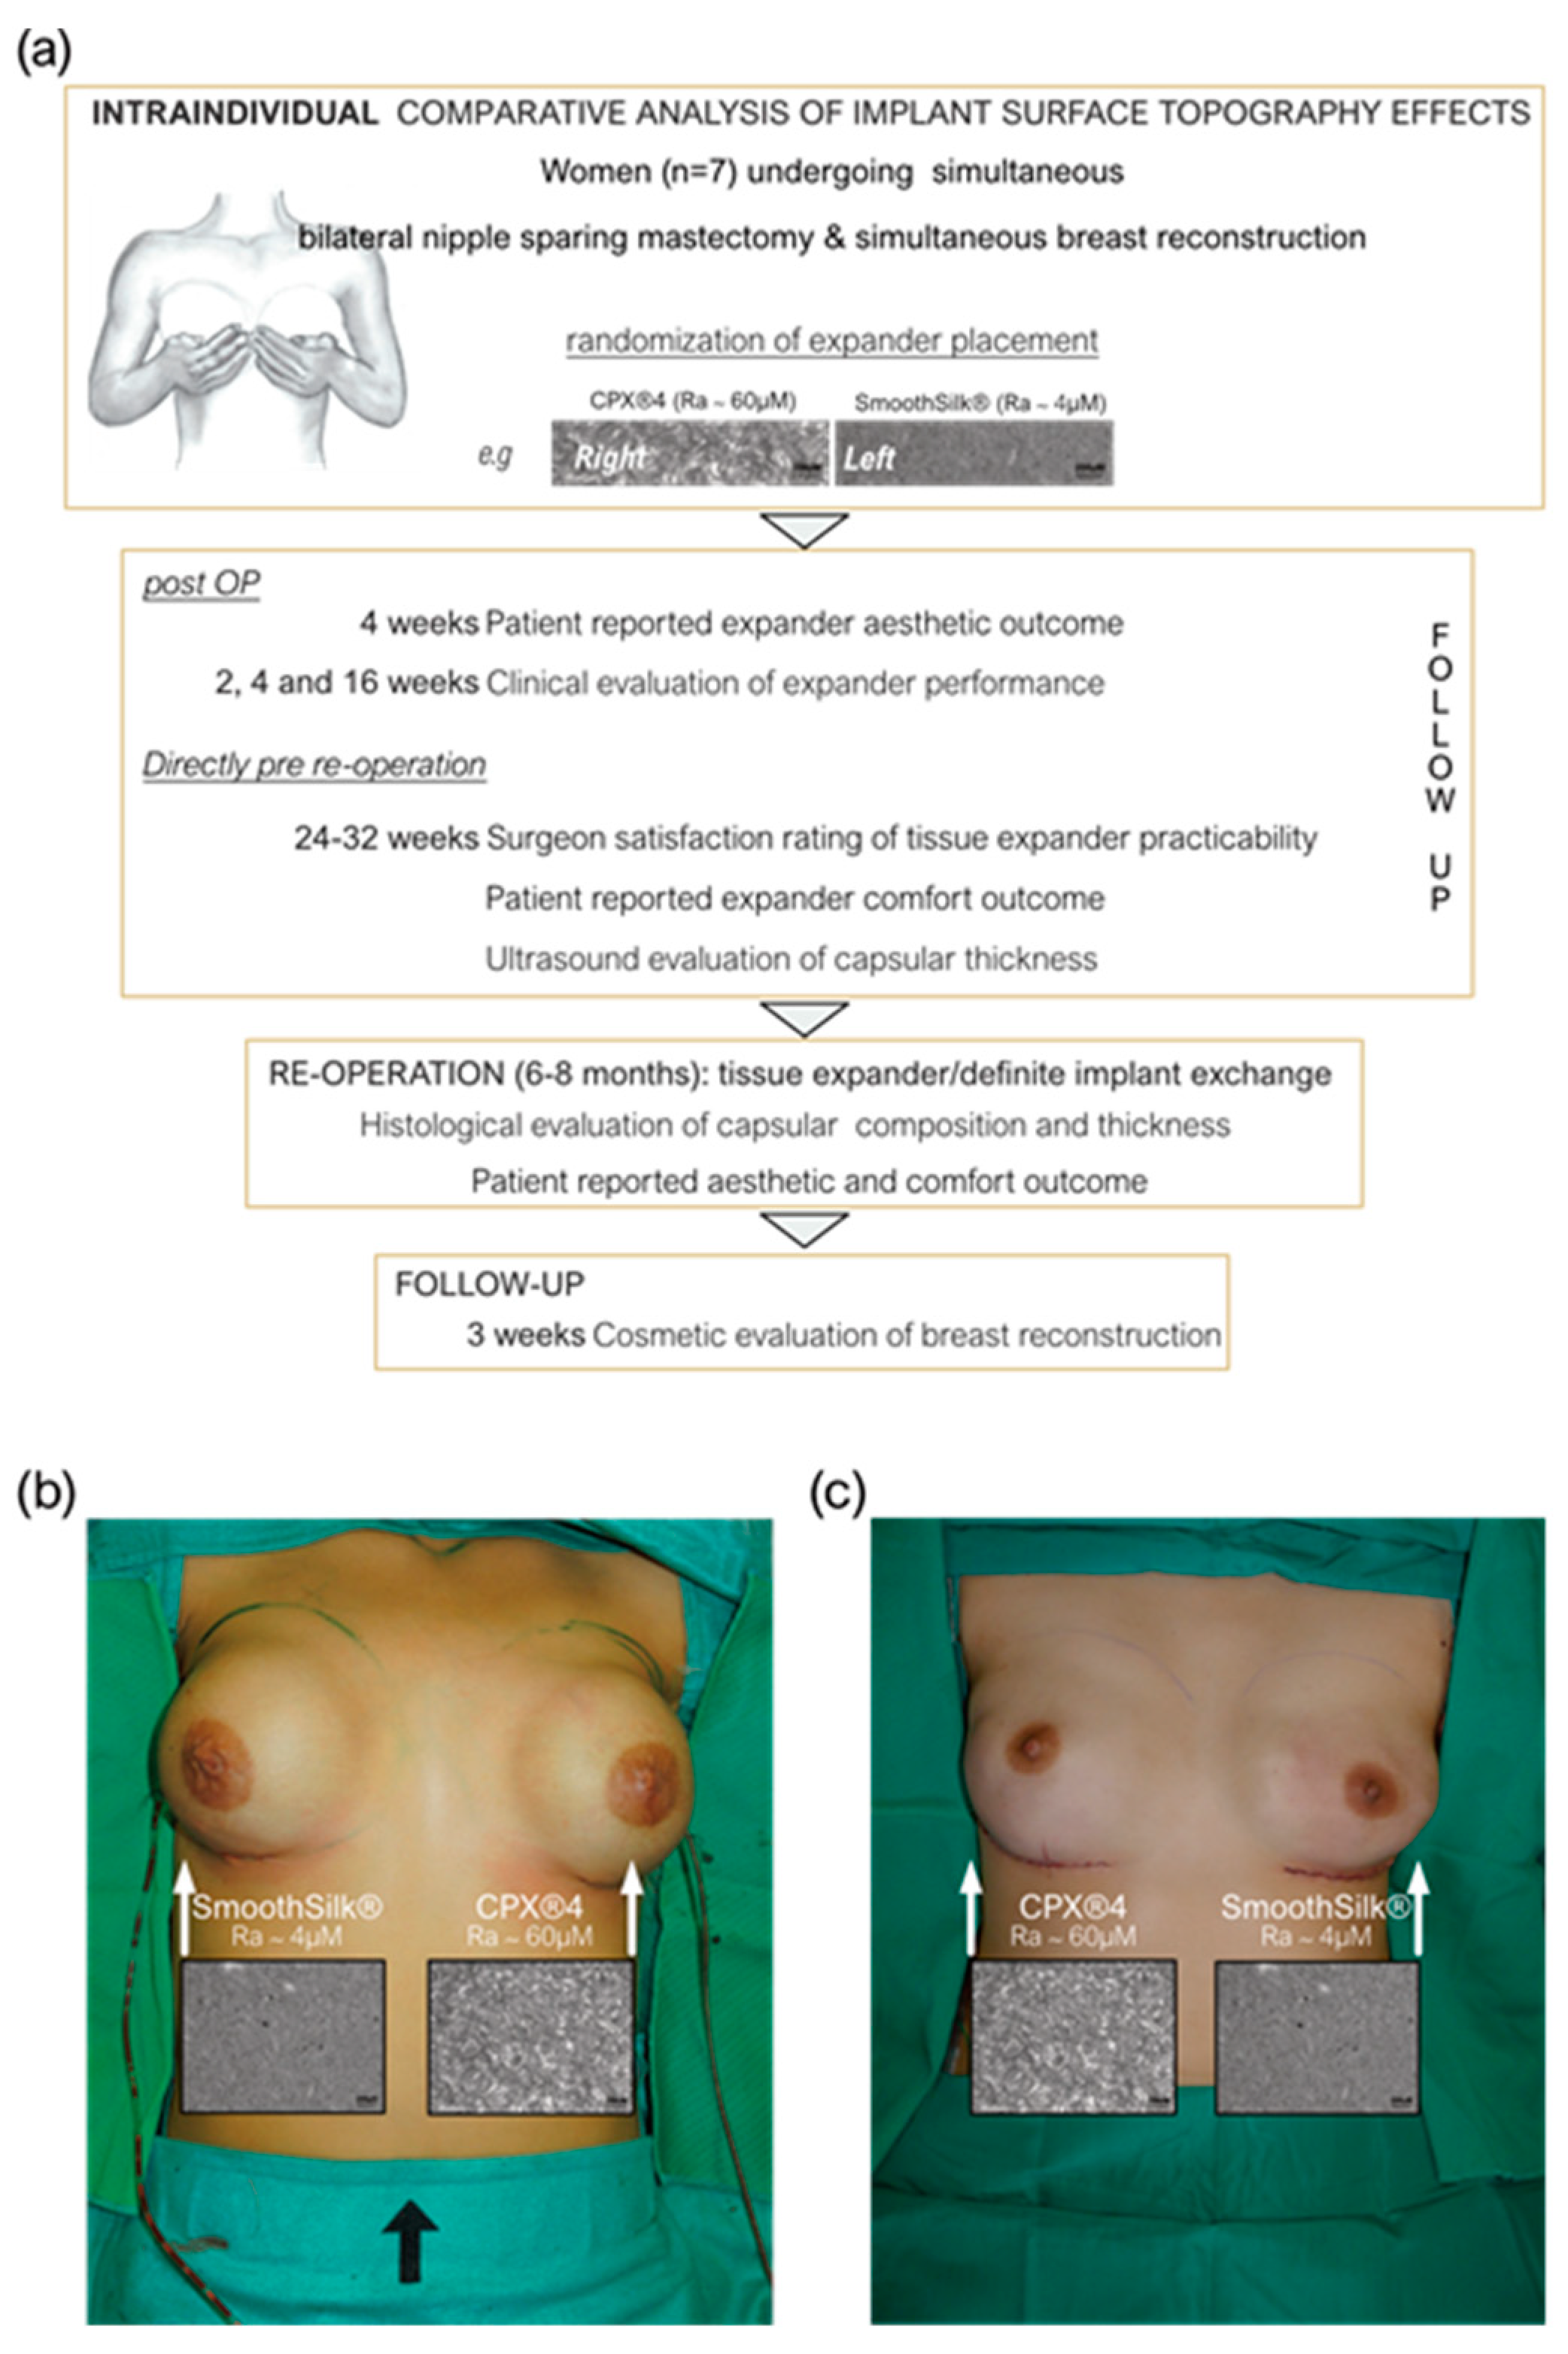 JCM | Free Full-Text | Is It All about Surface Topography? An  Intra-Individual Clinical Outcome Analysis of Two Different Implant  Surfaces in Breast Reconstruction